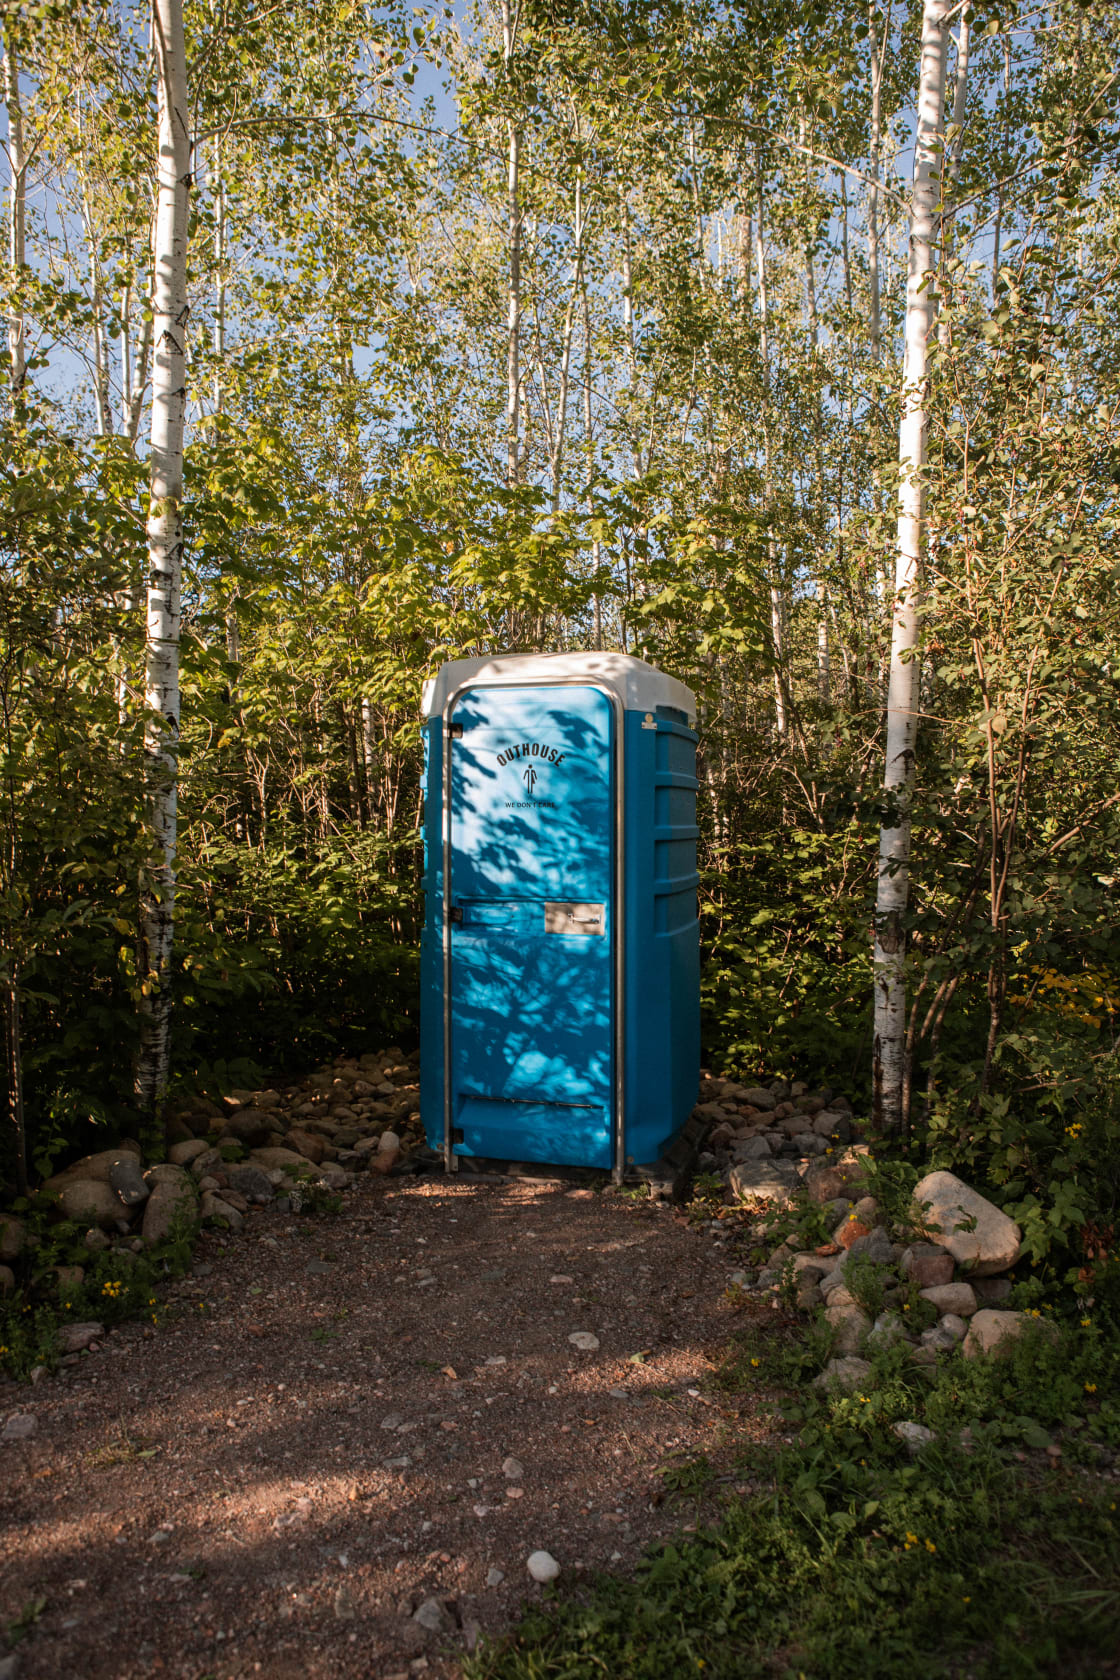 Our end of the campground had a clean portable restroom near by. 